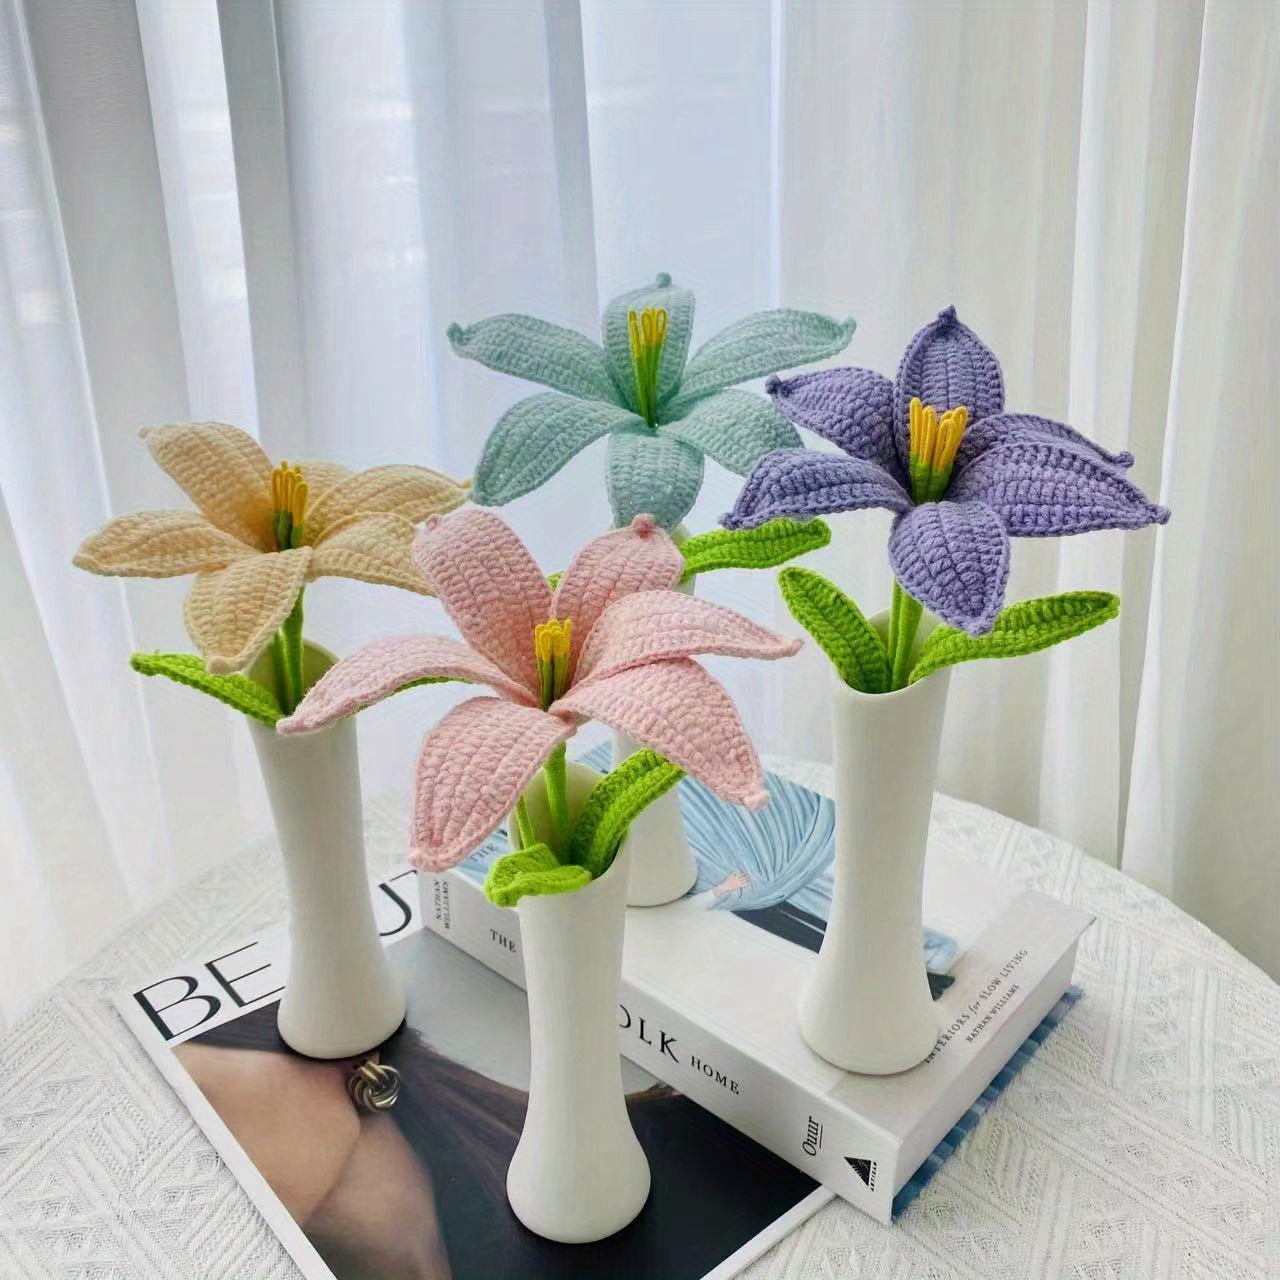 Set of 5 Cotton Yarn Knitting Artificial Flowers Finished Crochet Calla  Lily – Floral Supplies Store